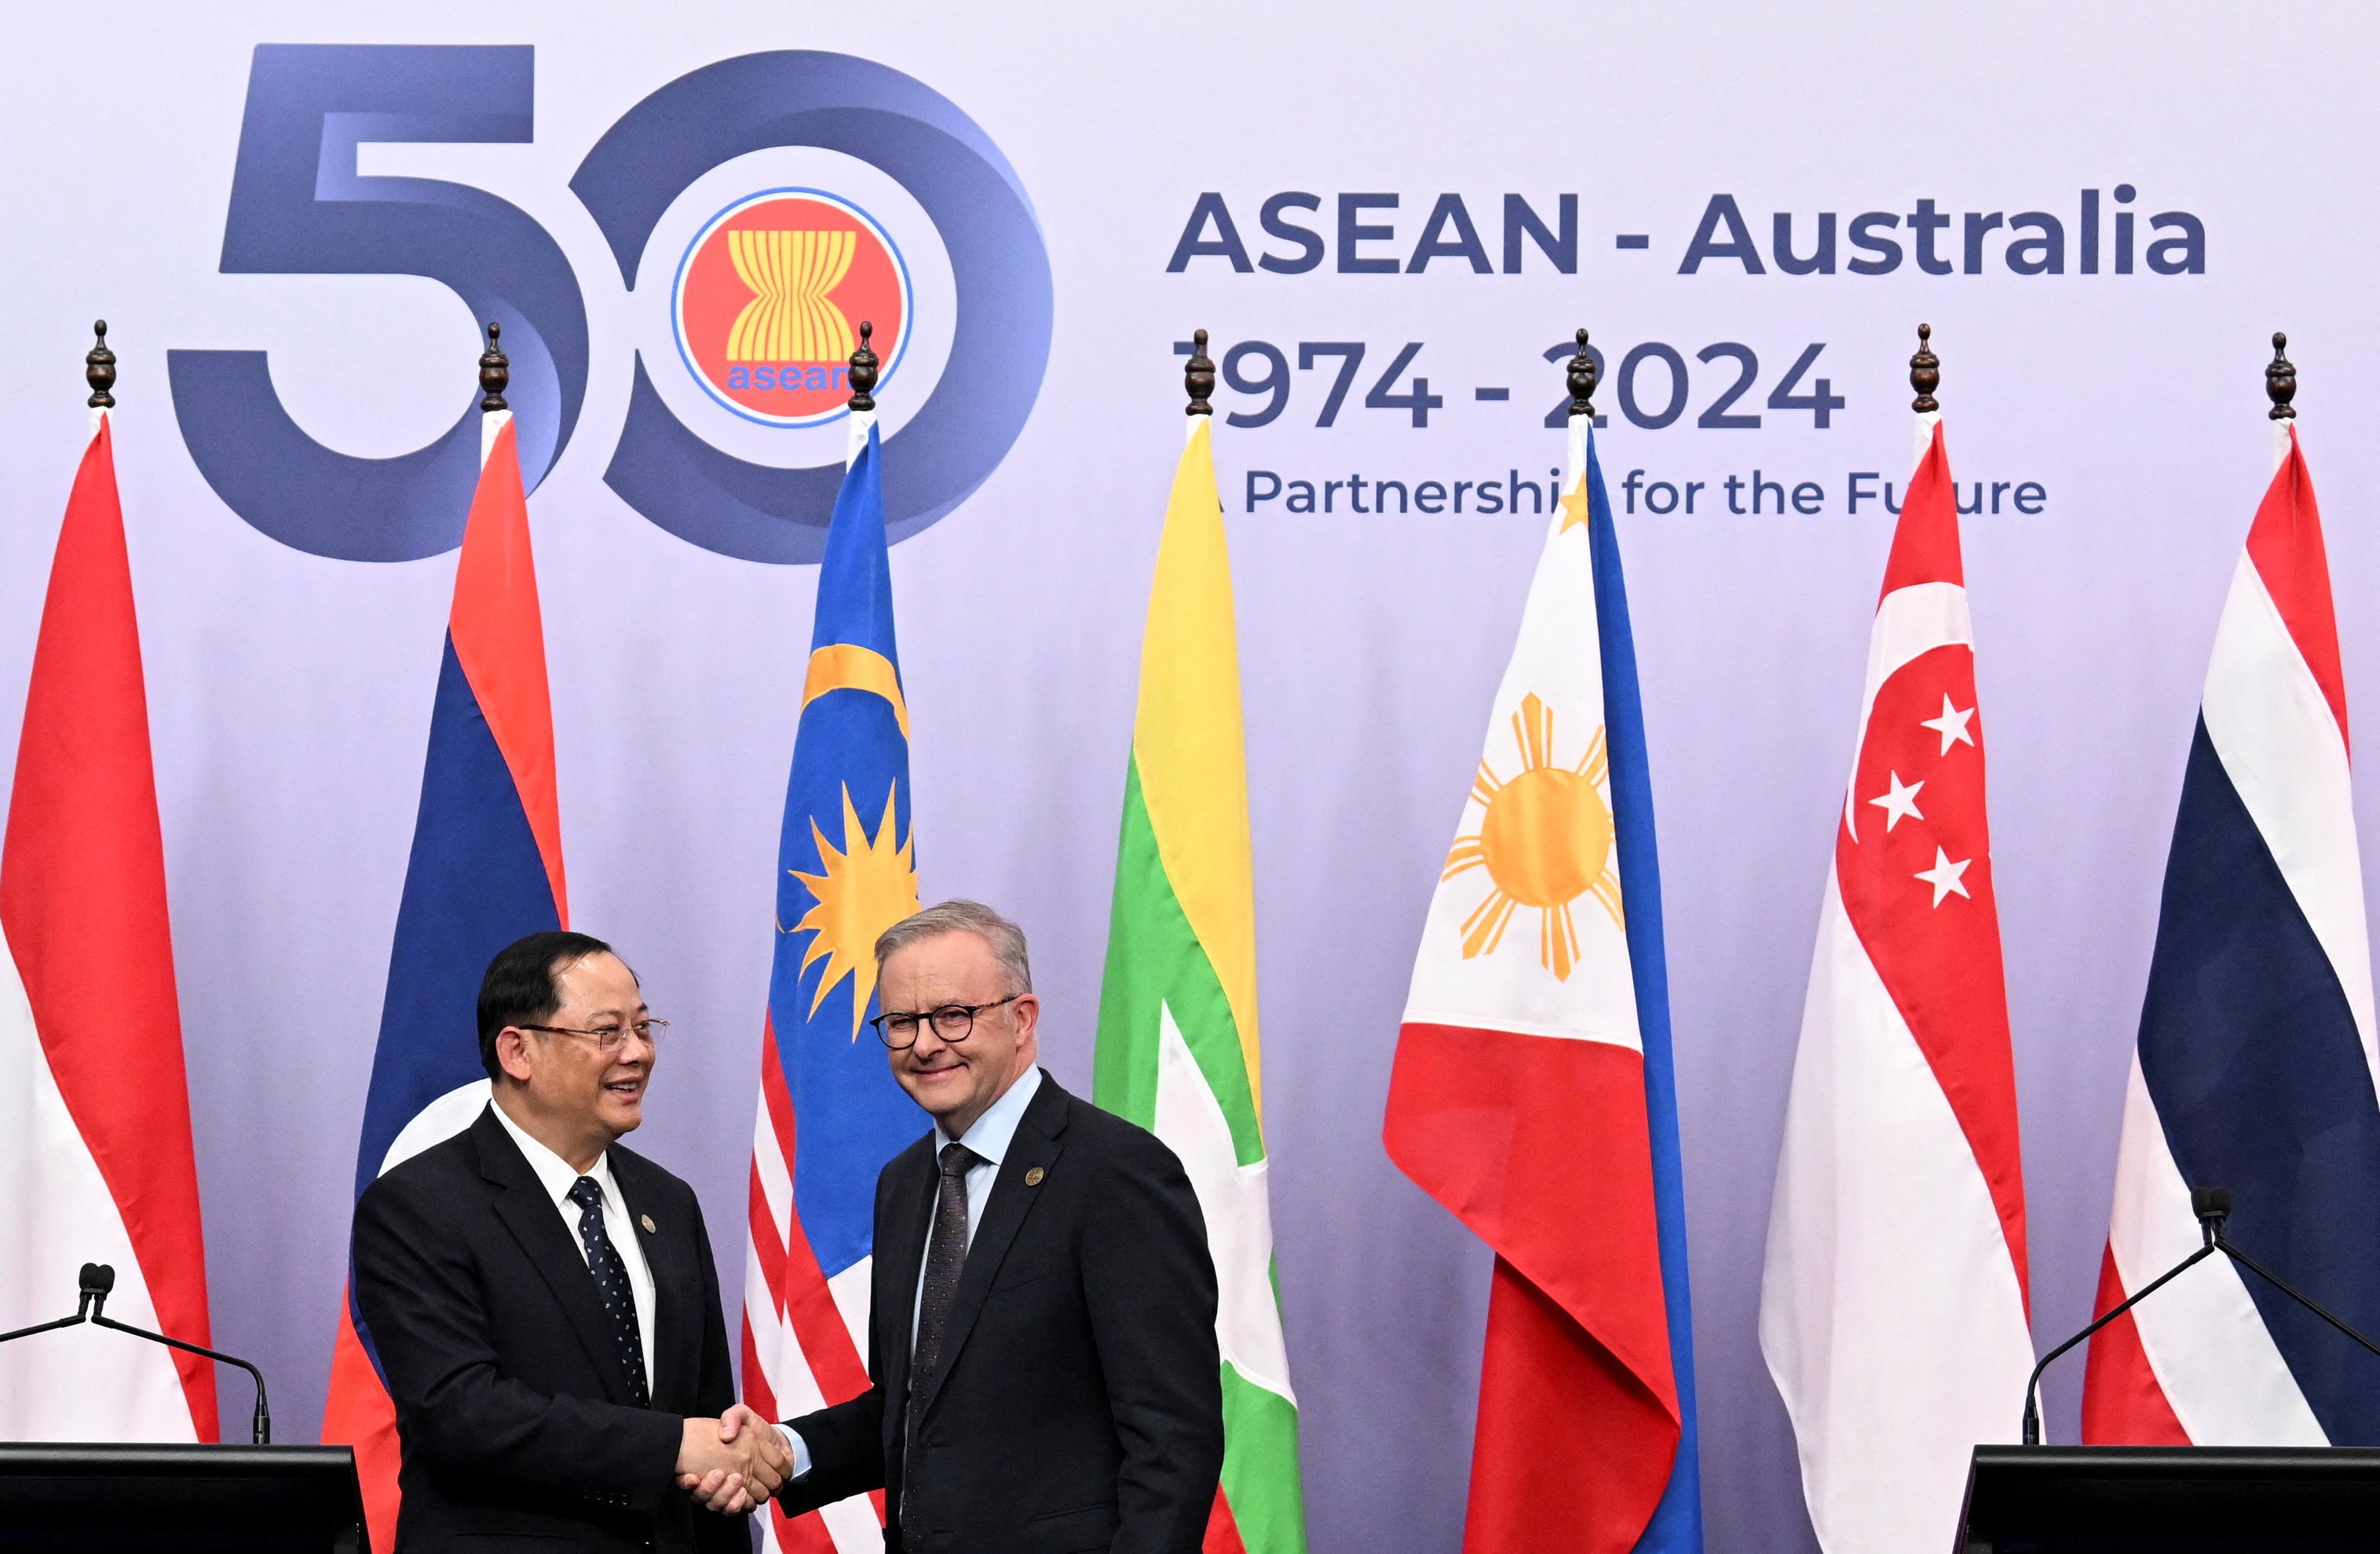 Australian Prime Minister Anthony Albanese shakes hands with Laos’ Prime Minister Sonexay Siphandone at the Asean-Australia Special Summit, in Melbourne on March 6. Photo: Jaimi Joy